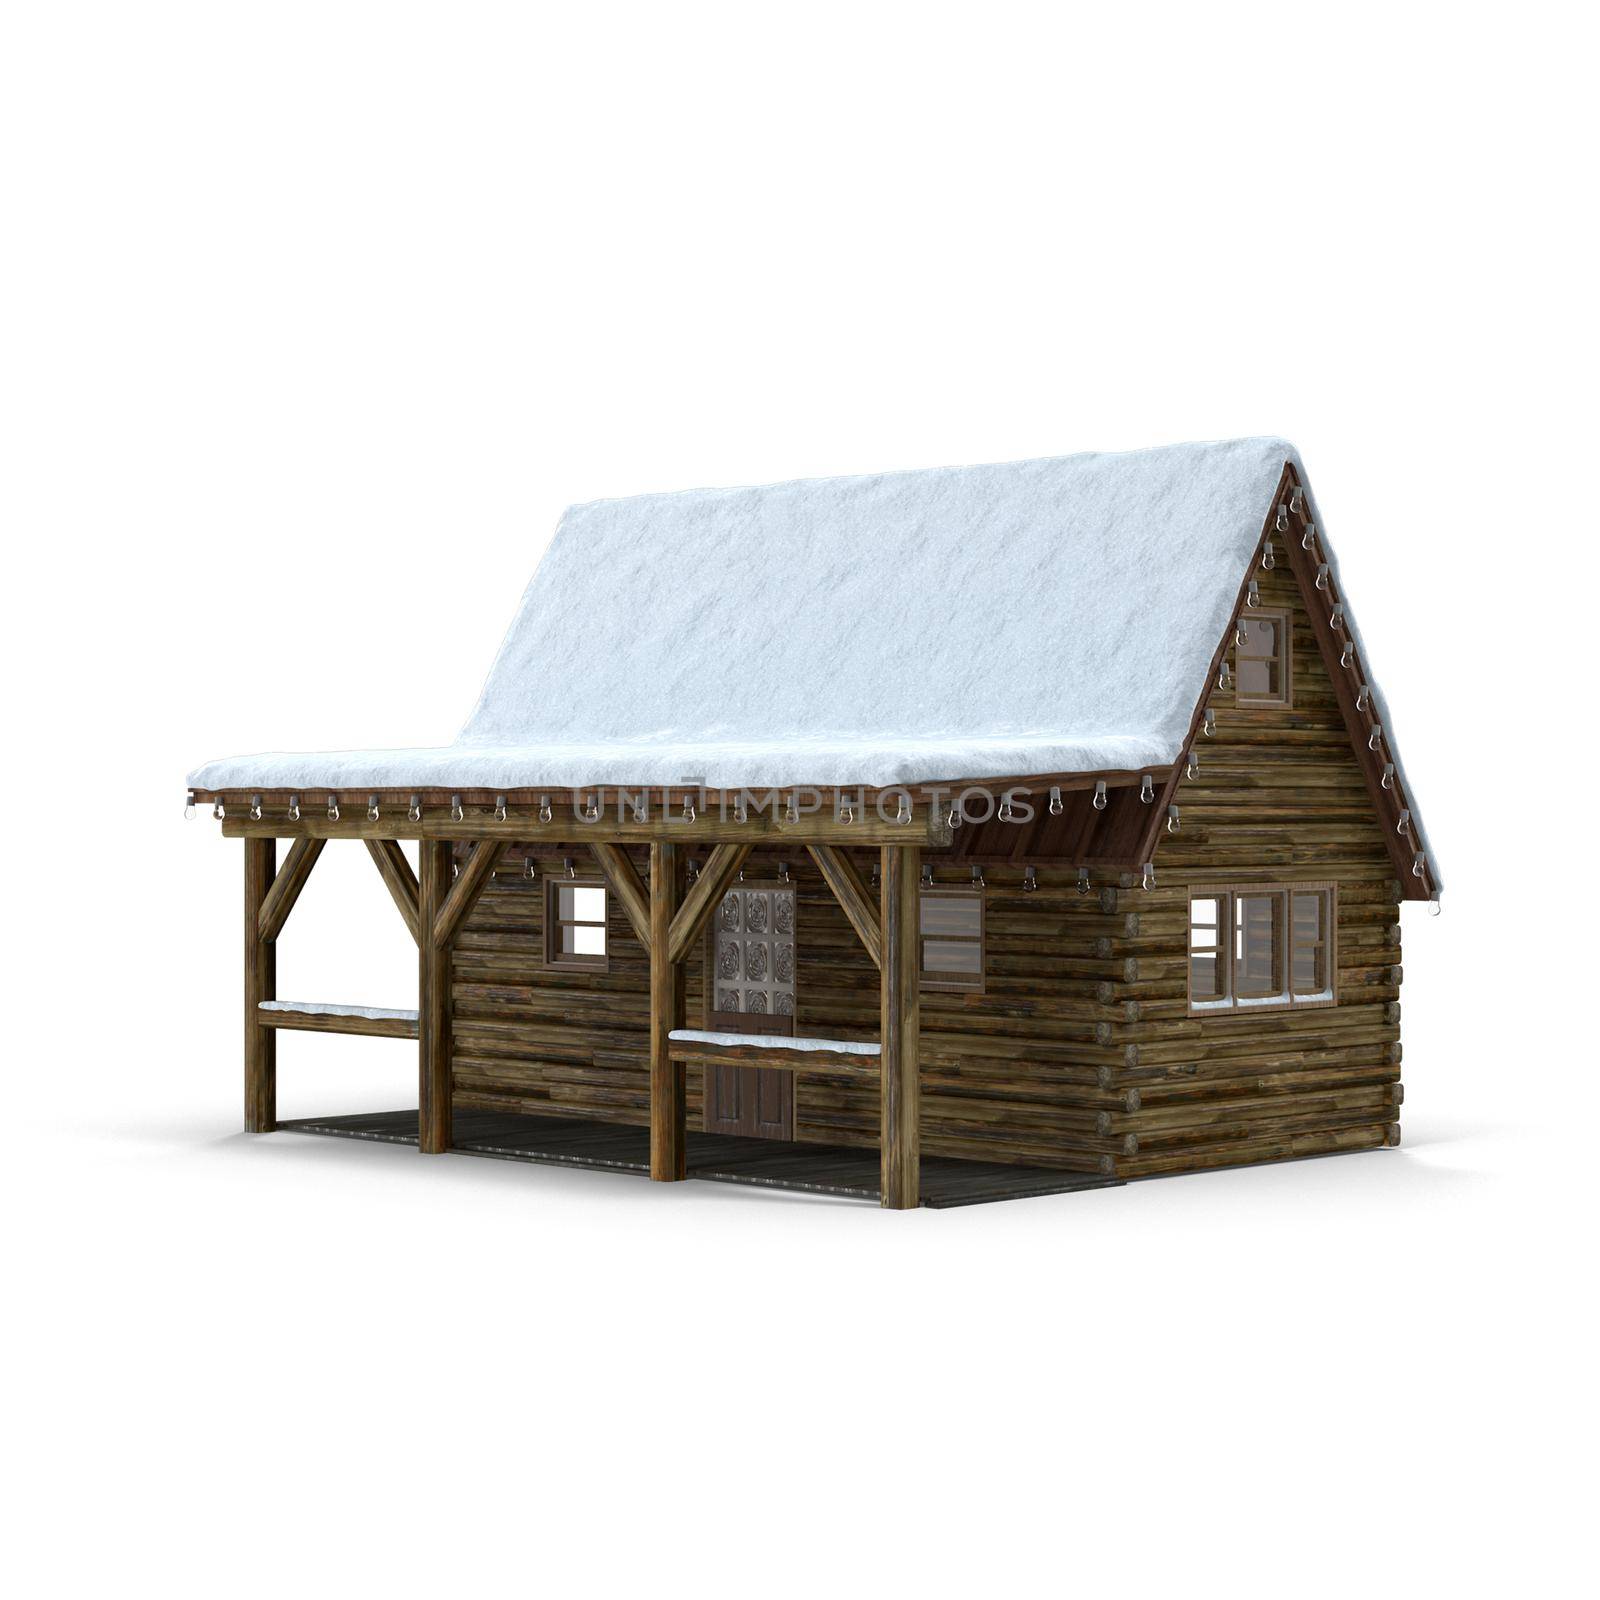 Wooden house, decorated for Christmas. 3D rendering. by georgina198